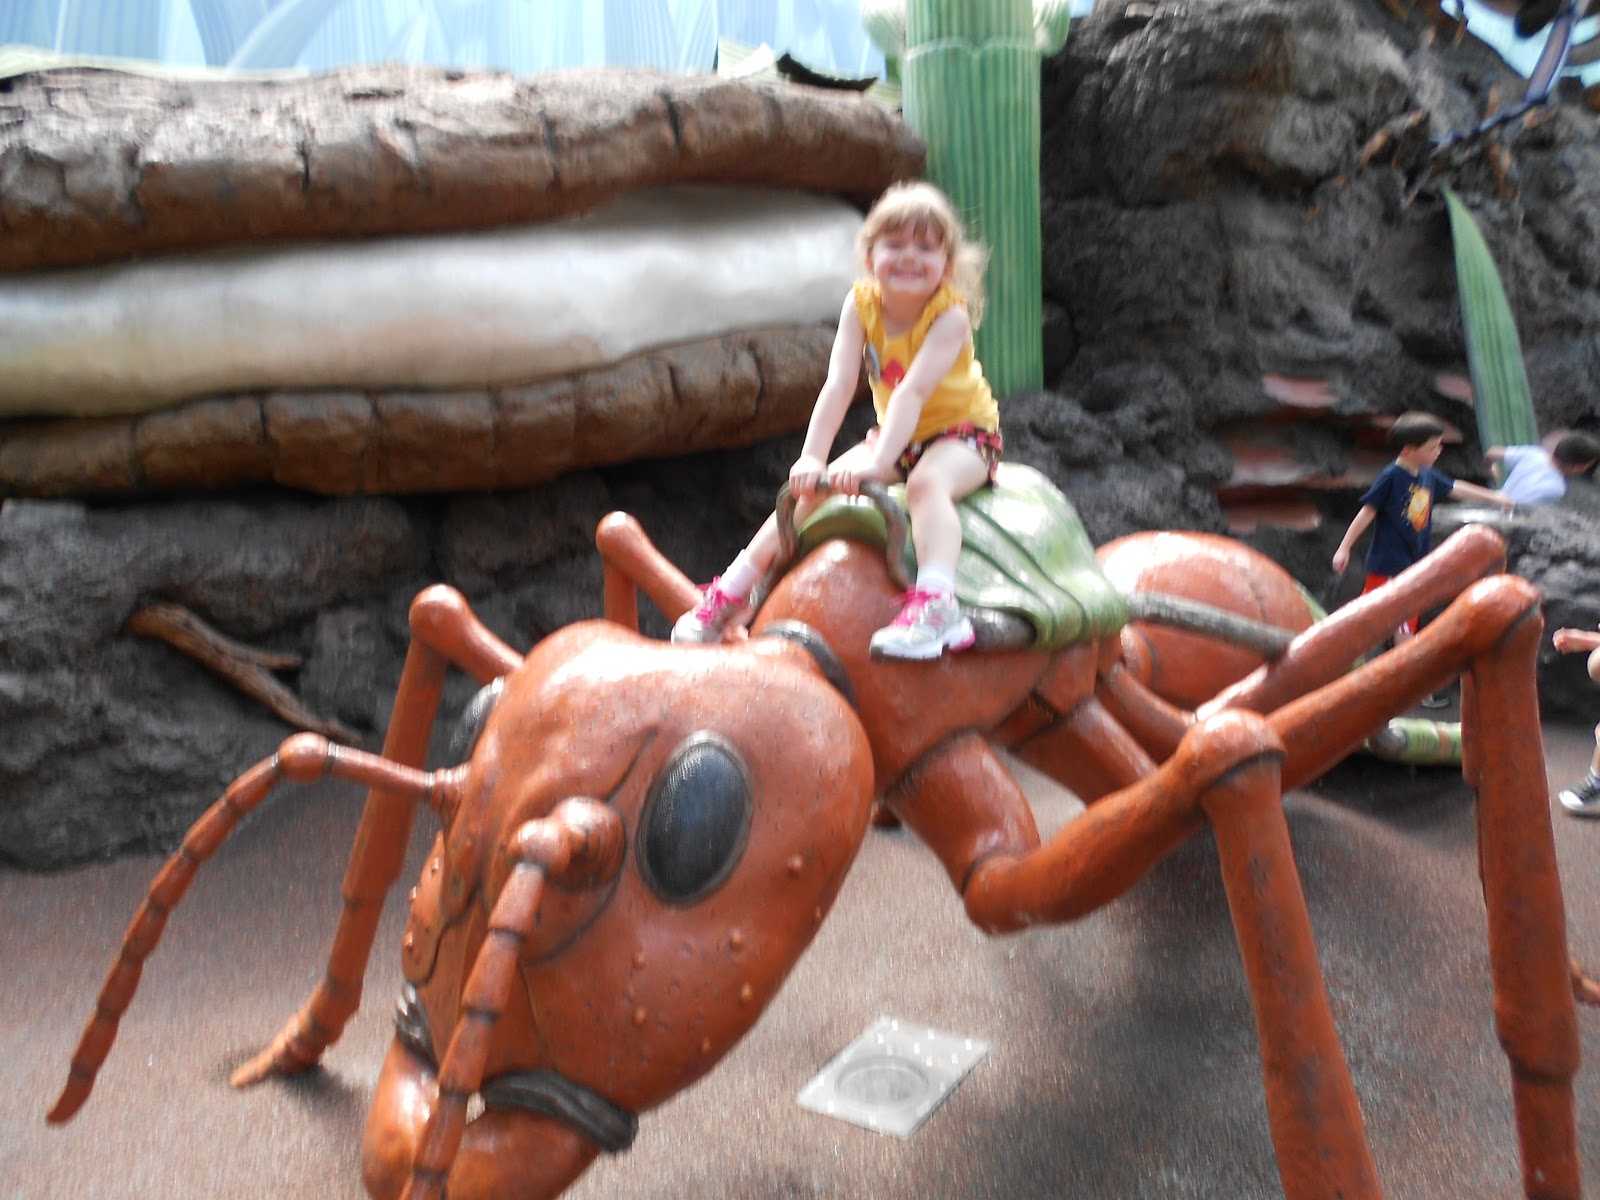 Adventures With Toddlers and Preschoolers: Top 10 Rides/Attractions for